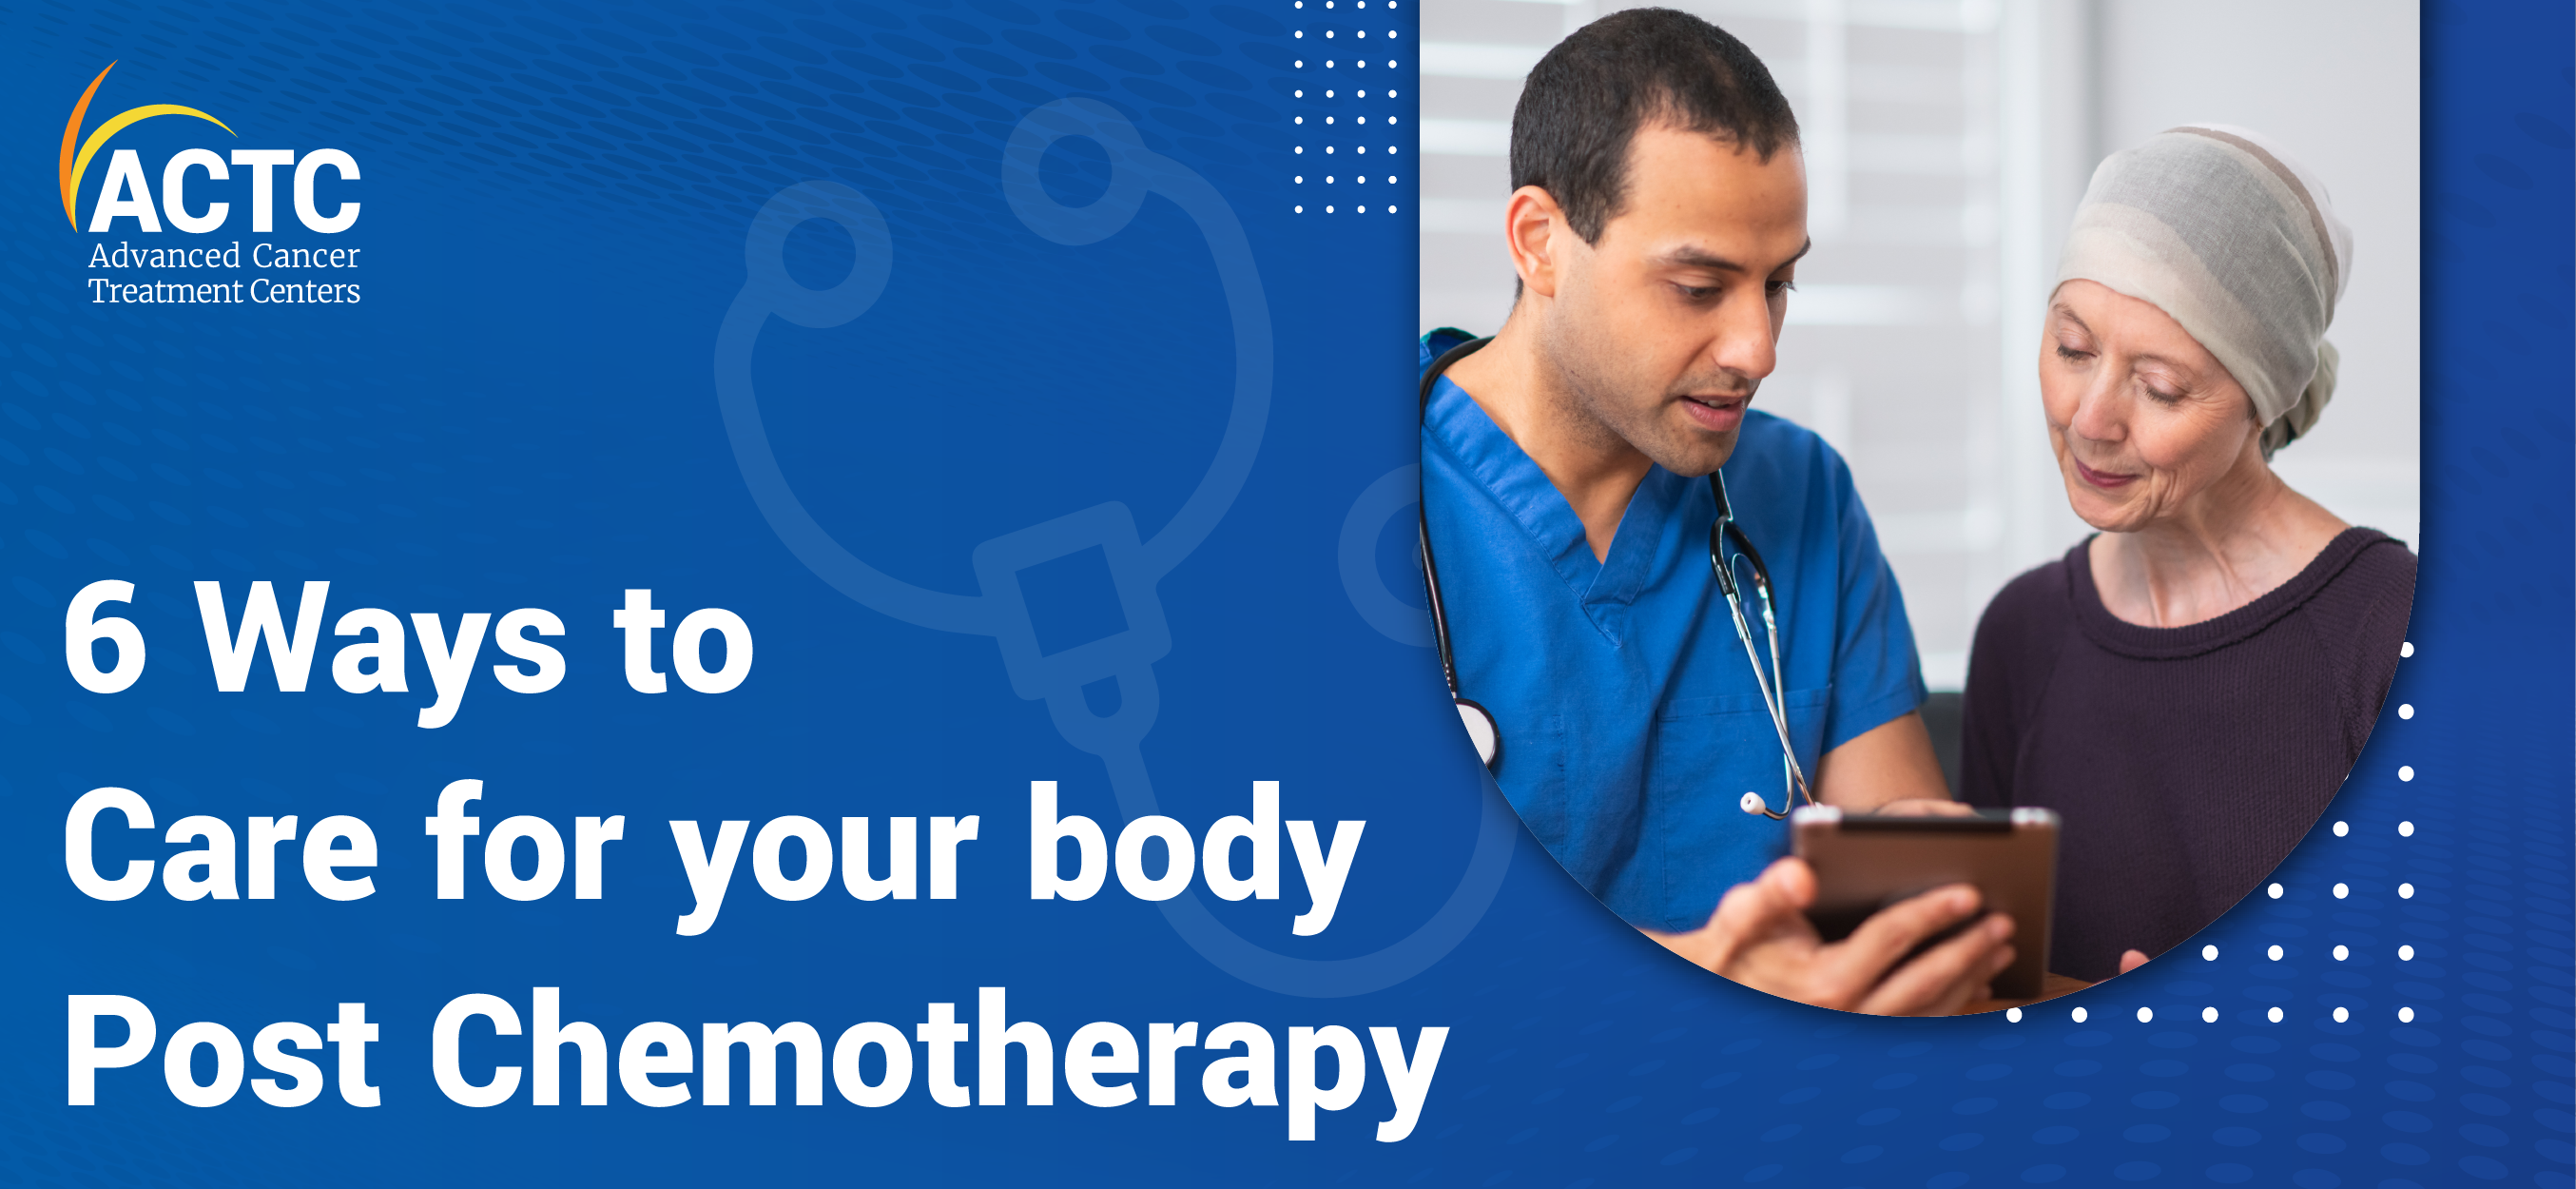 6 Ways to Care for your body Post Chemotherapy 